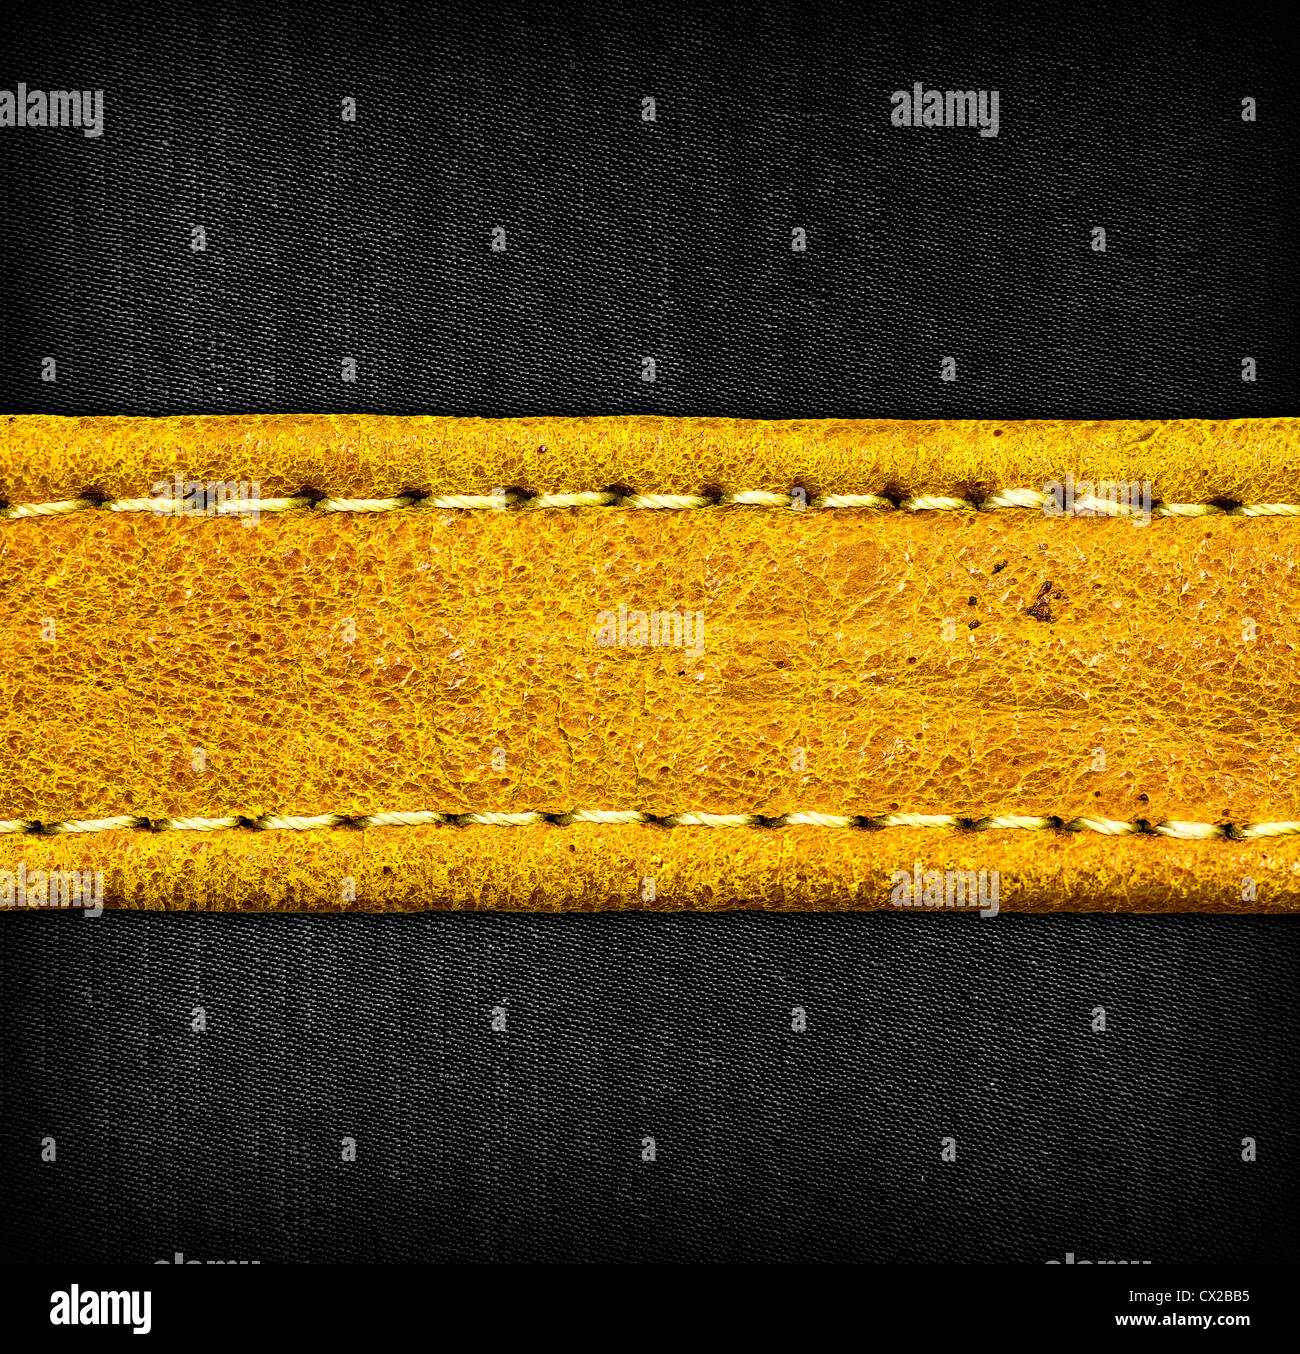 Image of leather and textile background. Stock Photo